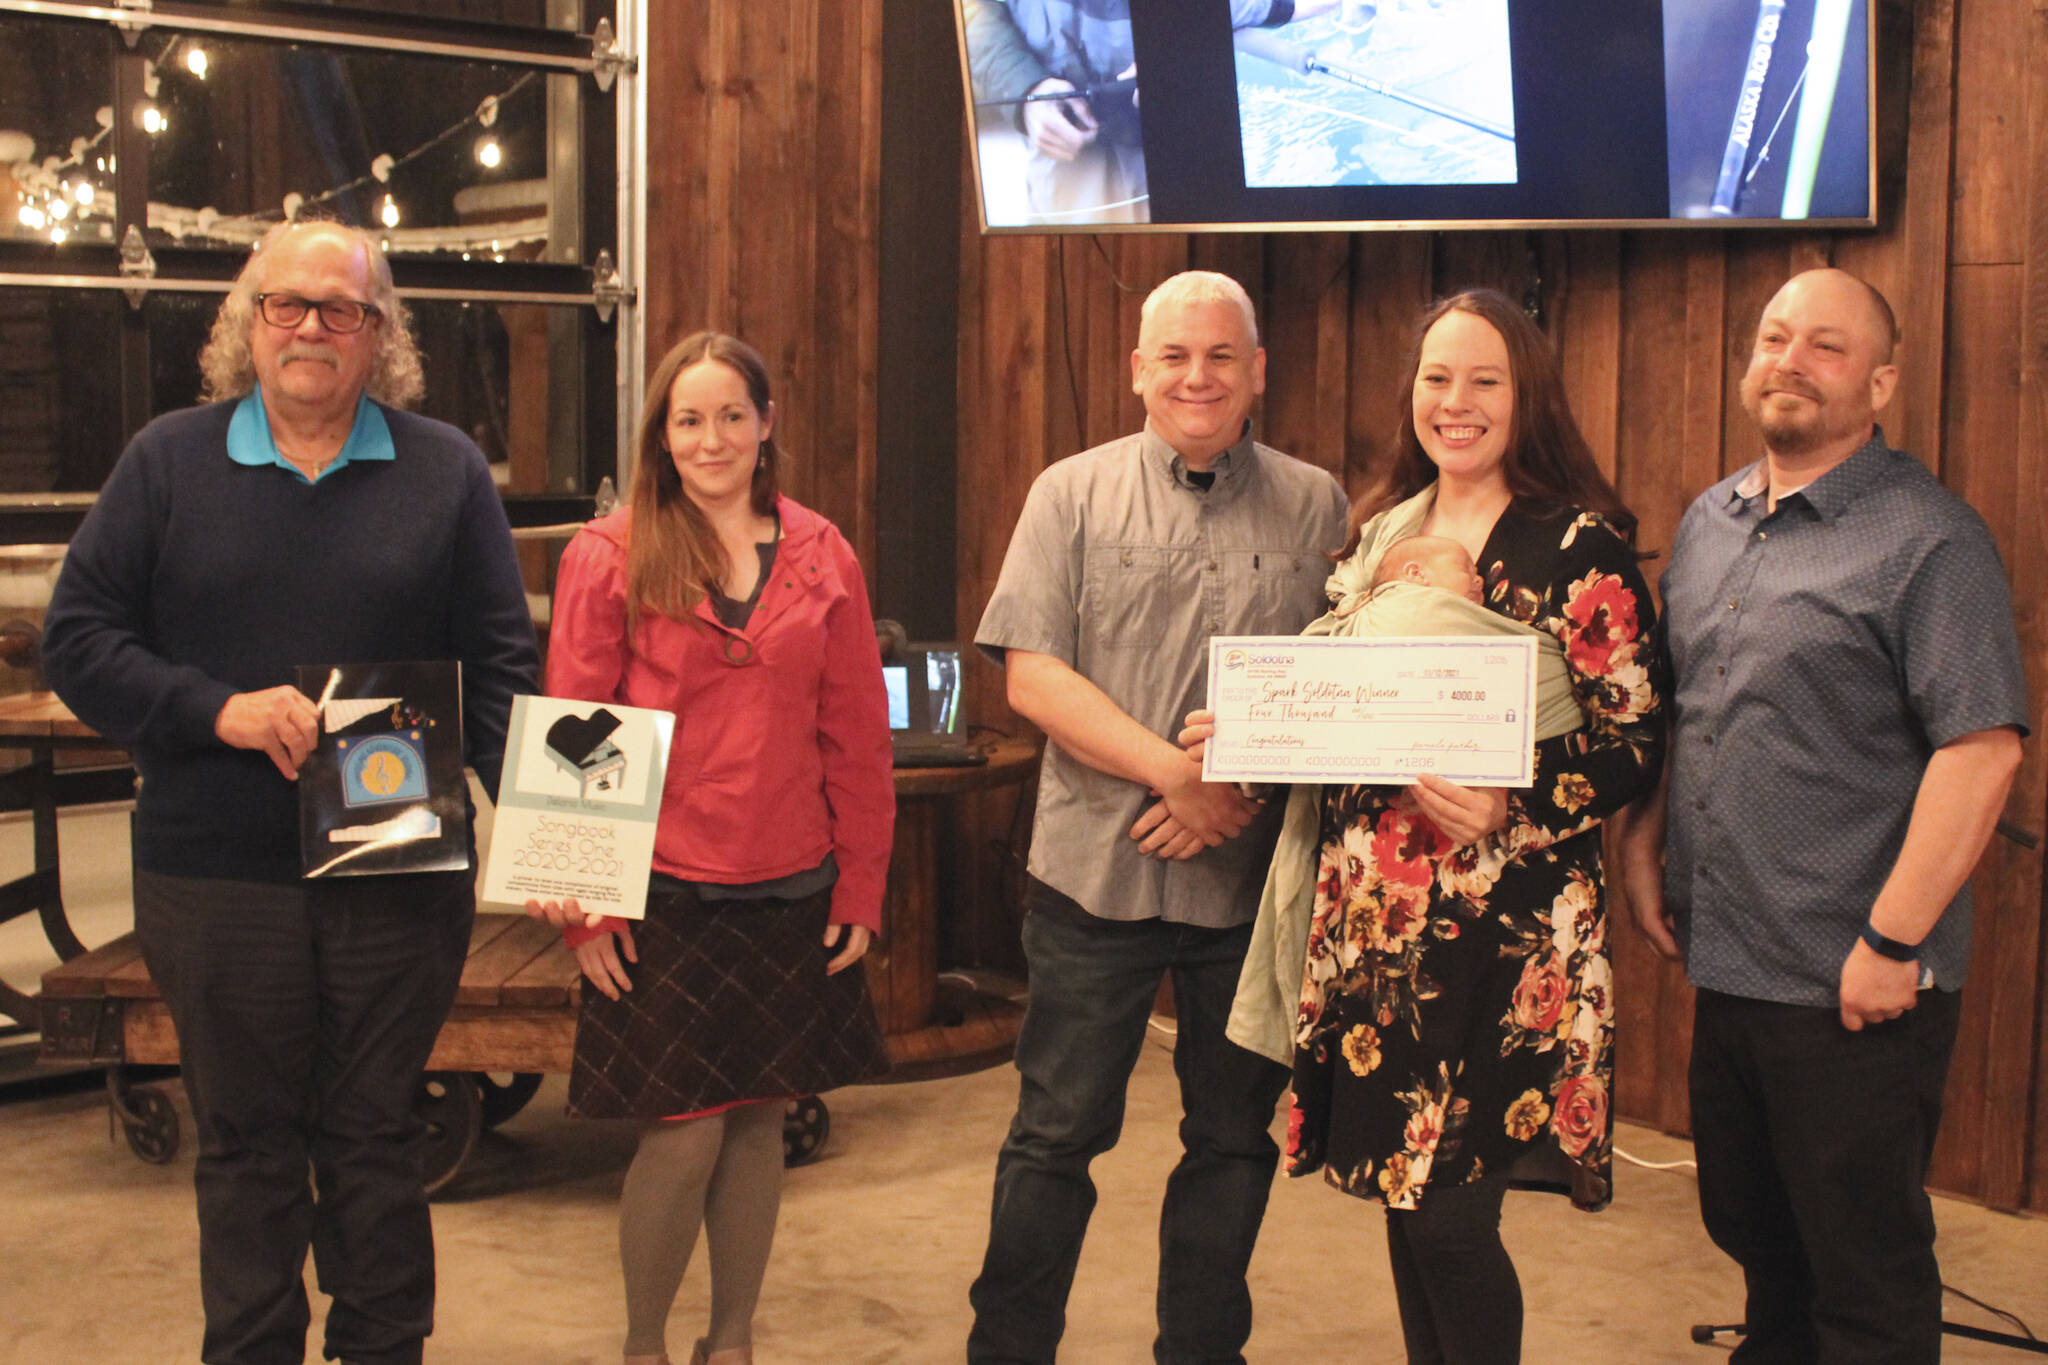 Delana Green, second from right, poses Friday with judges during the “Spark Soldotna” event at the Lone Moose Lodge. From left: Steve Horn, retired Kenai Peninsula College Associate Professor of Business; Jenny Neyman, KDLL general manager; Tim Jordan, of Northern Tech Group; Delana Green, winner; and Kenai Peninsula Borough Assembly member Tyson Cox.